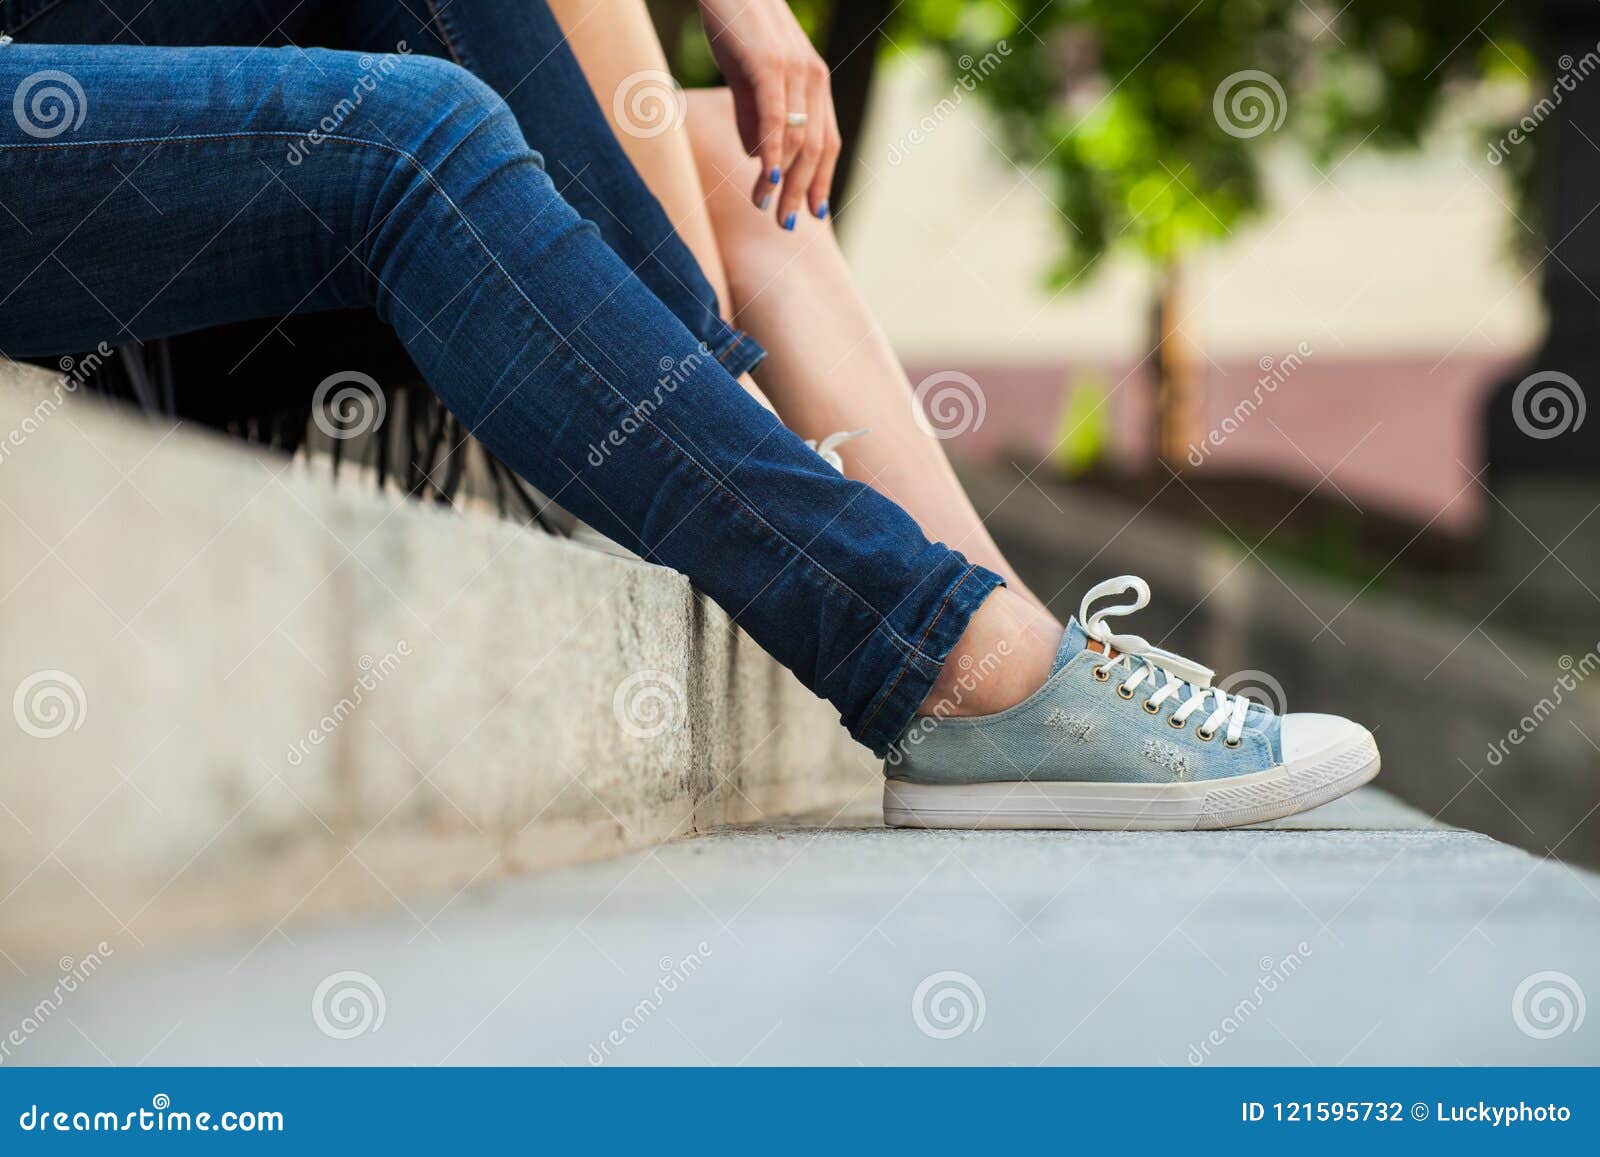 Women Wearing Sneakers Sitting on Stairs Stock Photo - Image of blue ...